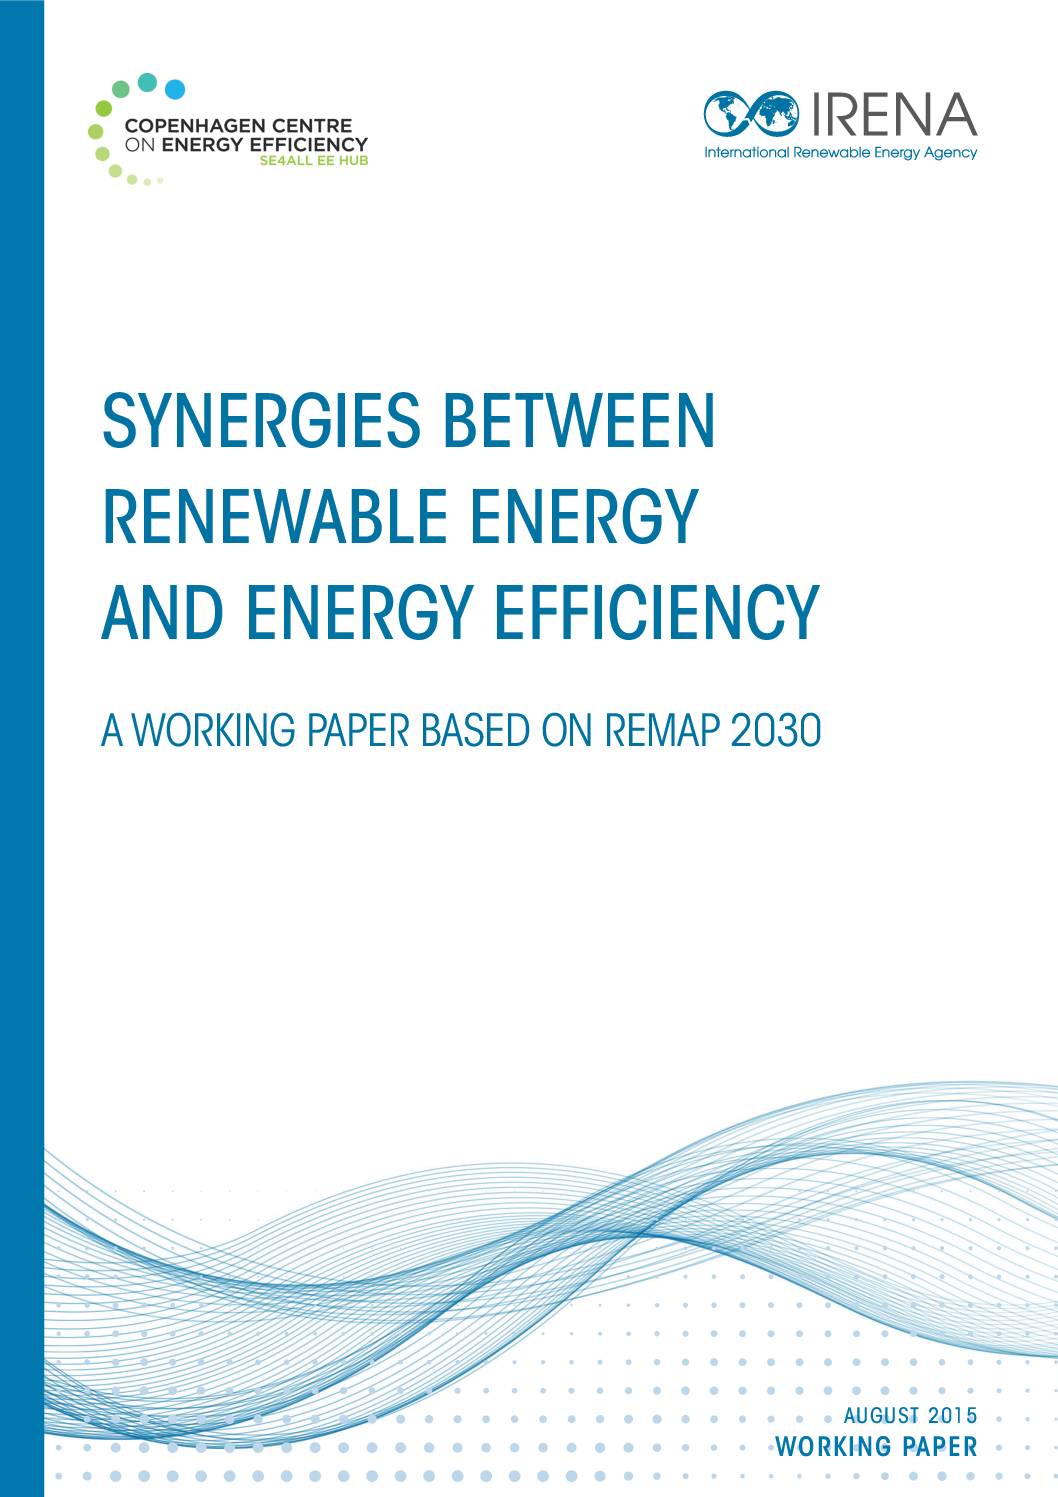 Synergies Between Renewable Energy and Energy Efficiency – A Working Paper Based on REMAP 2030